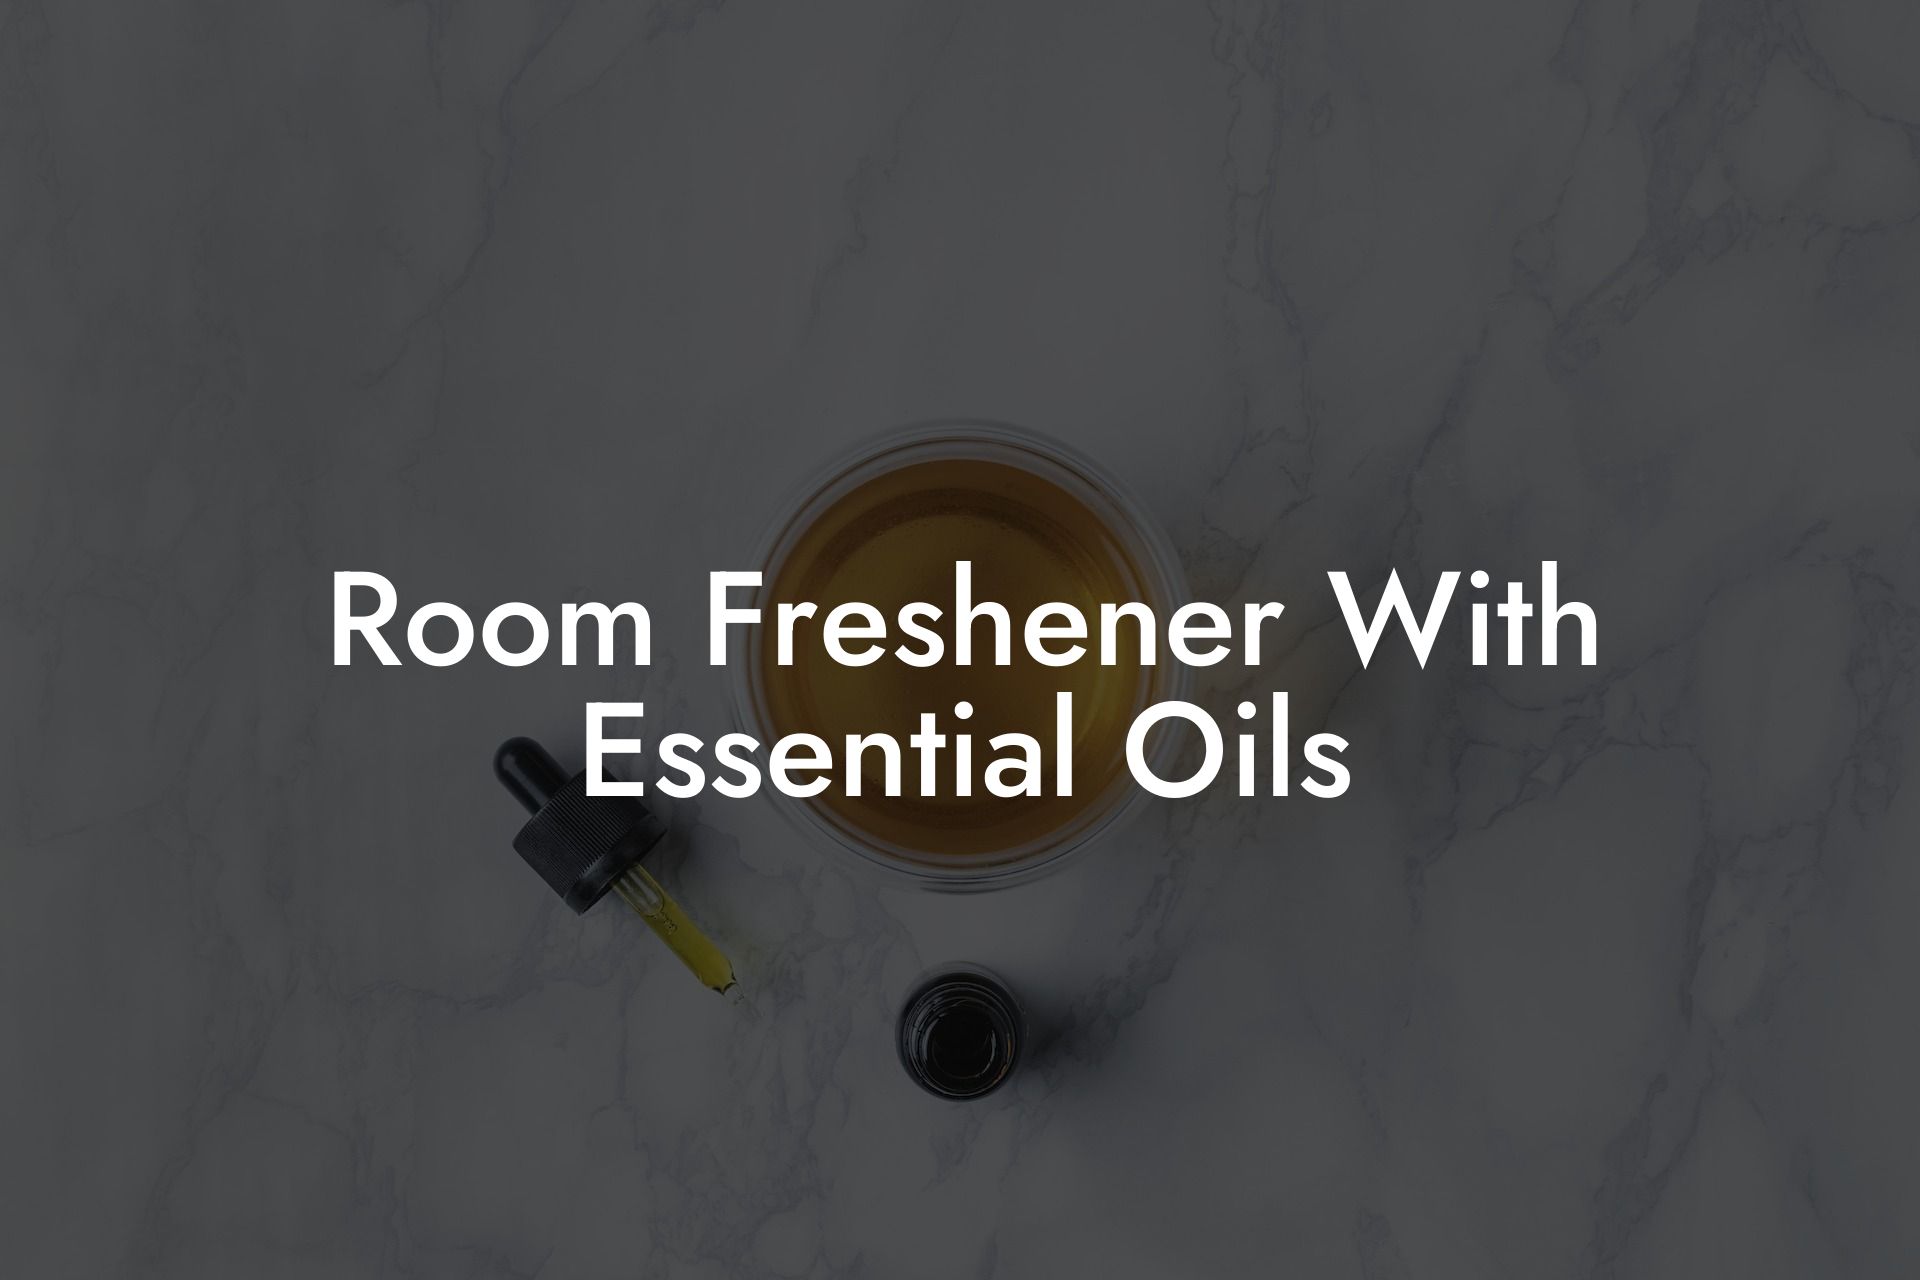 Room Freshener With Essential Oils